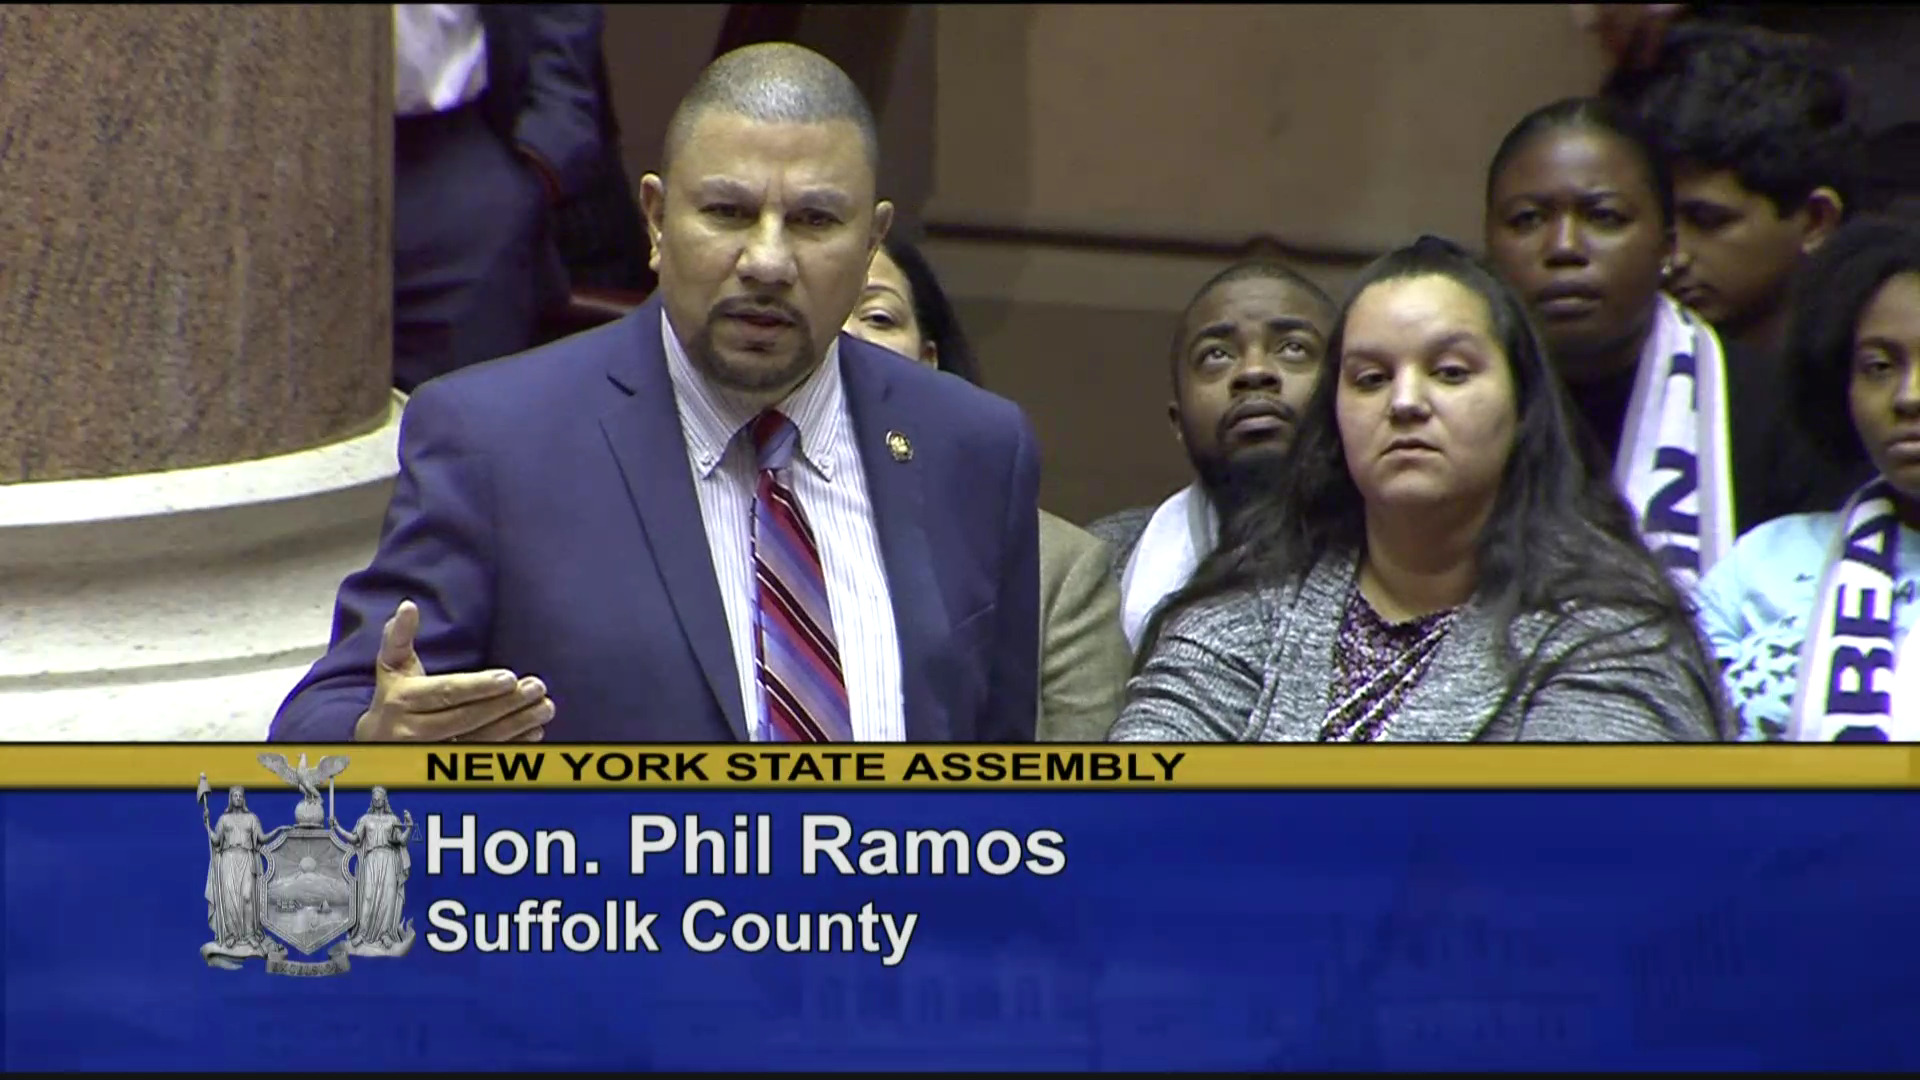 Ramos Speaks in Support of the DREAM Act